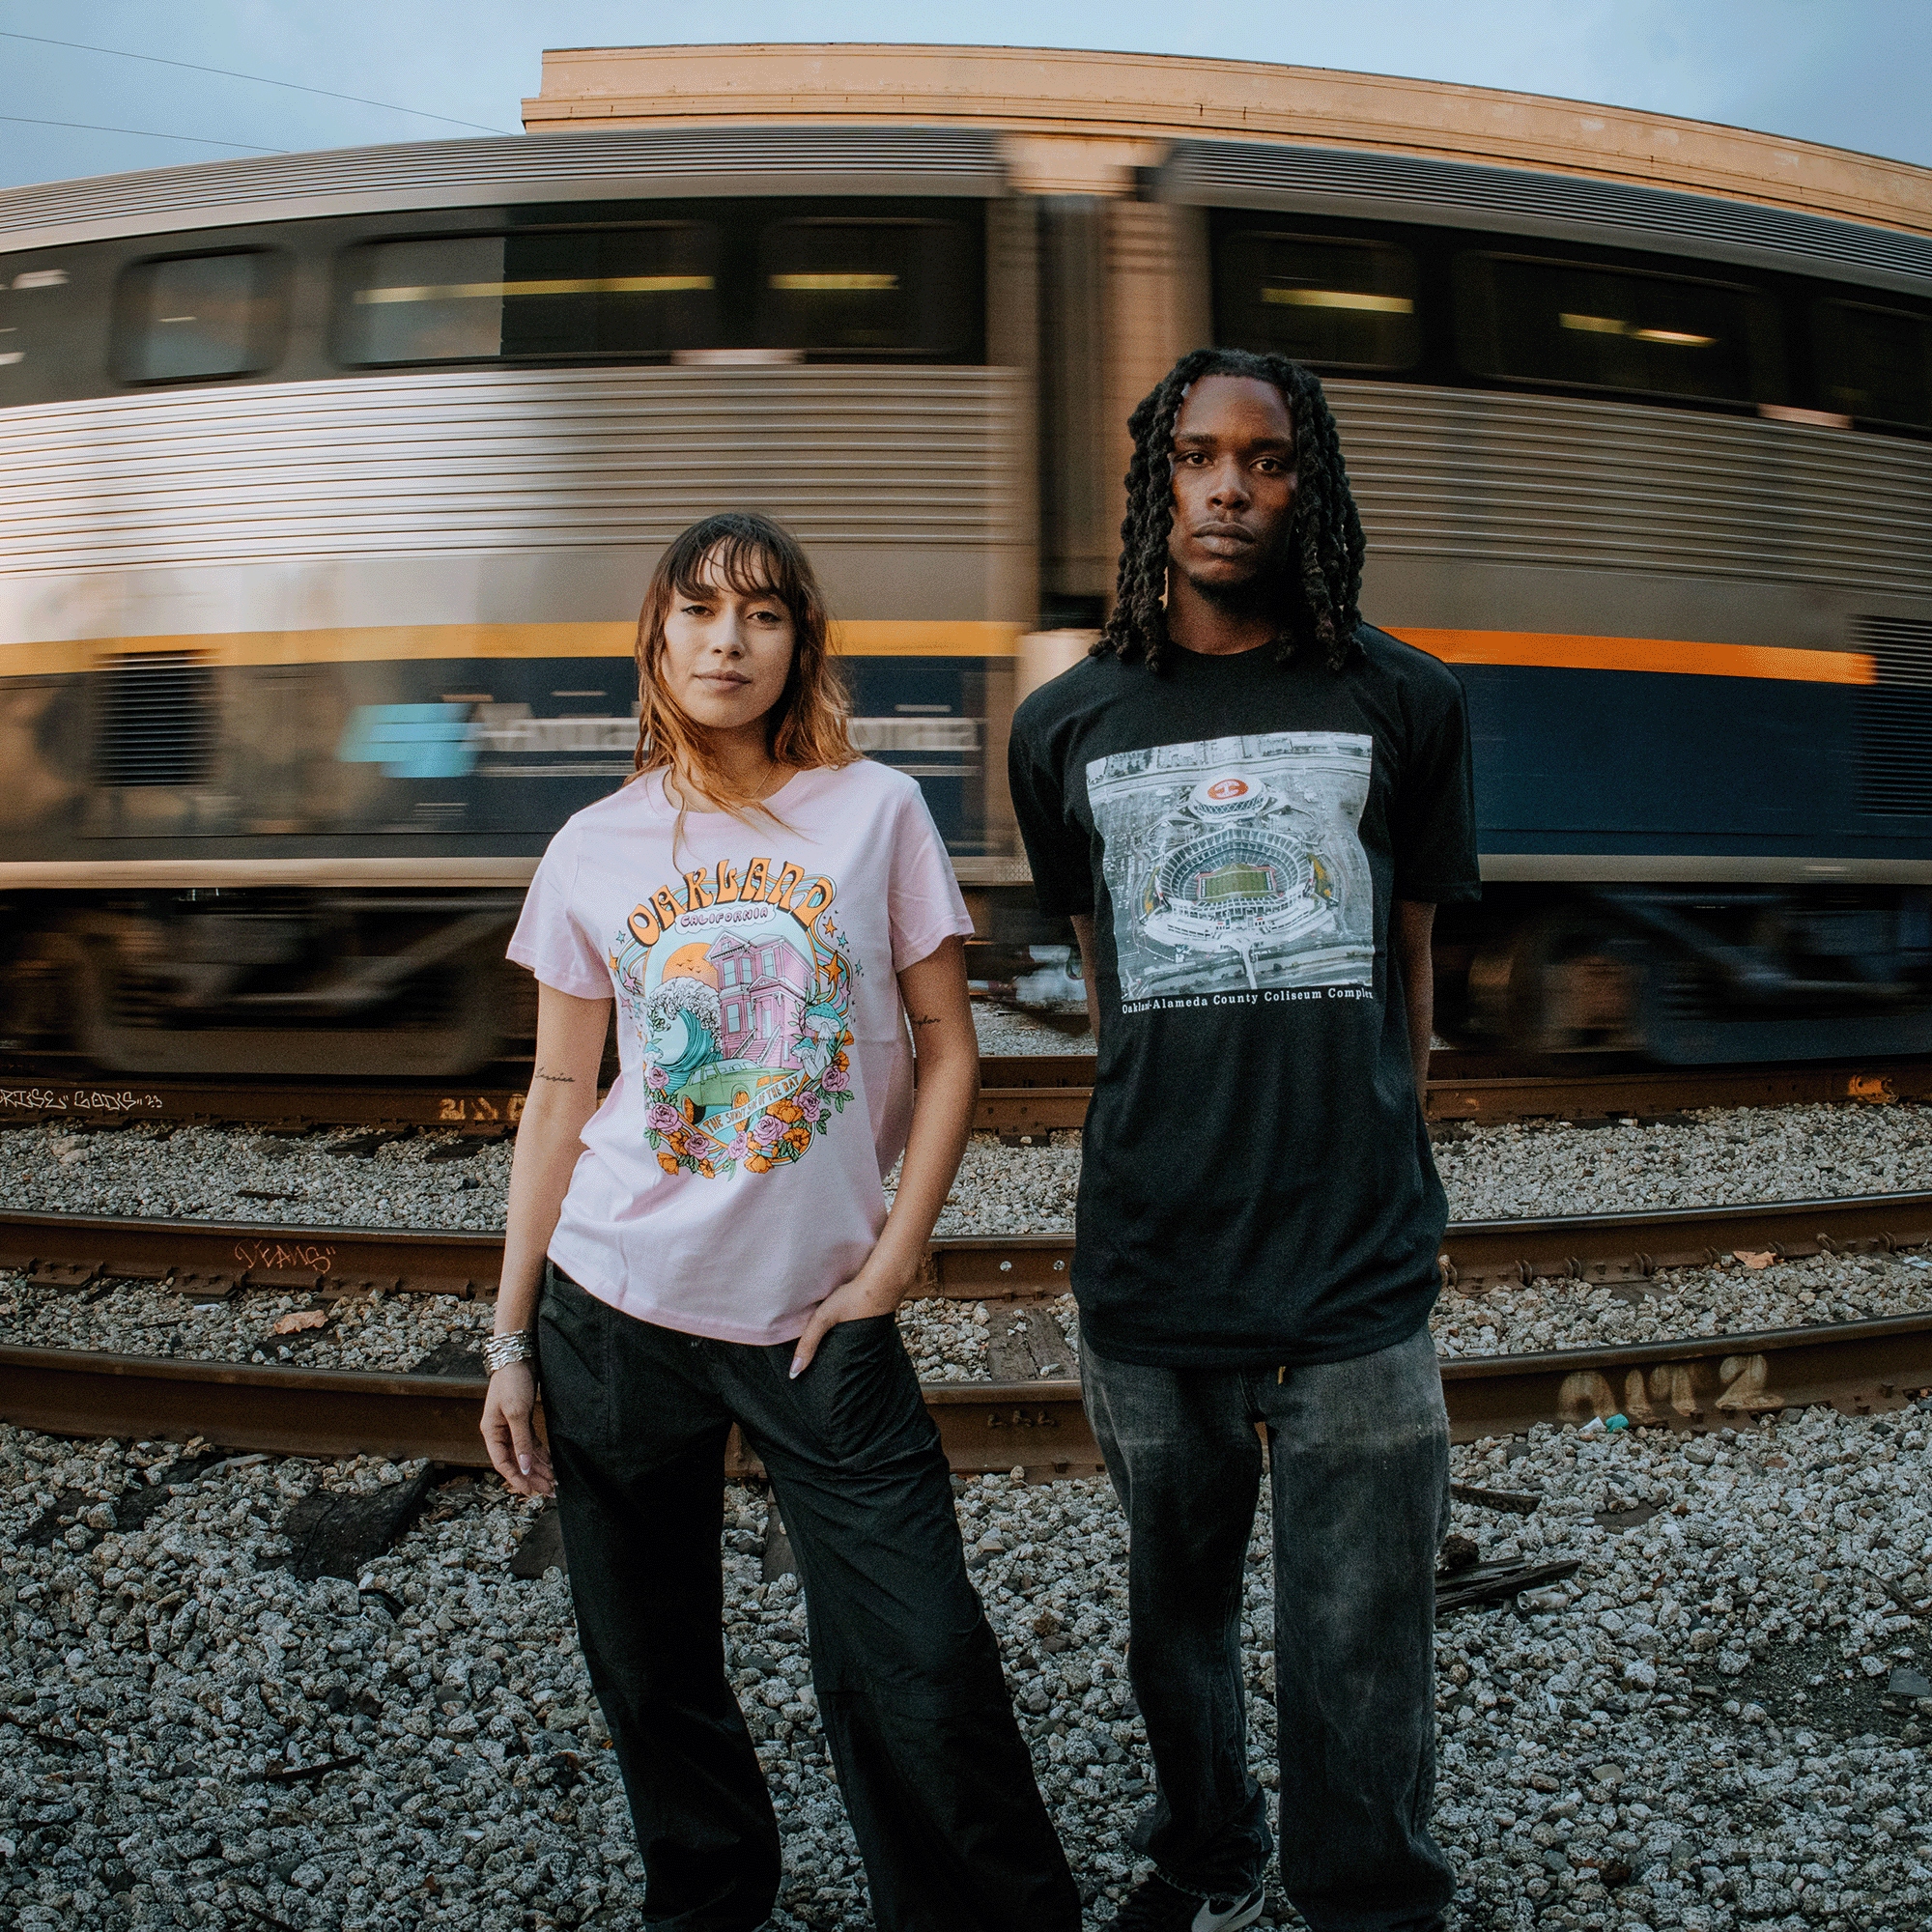 A man and woman are standing outside before a moving train wearing Oaklandish t-shirts.